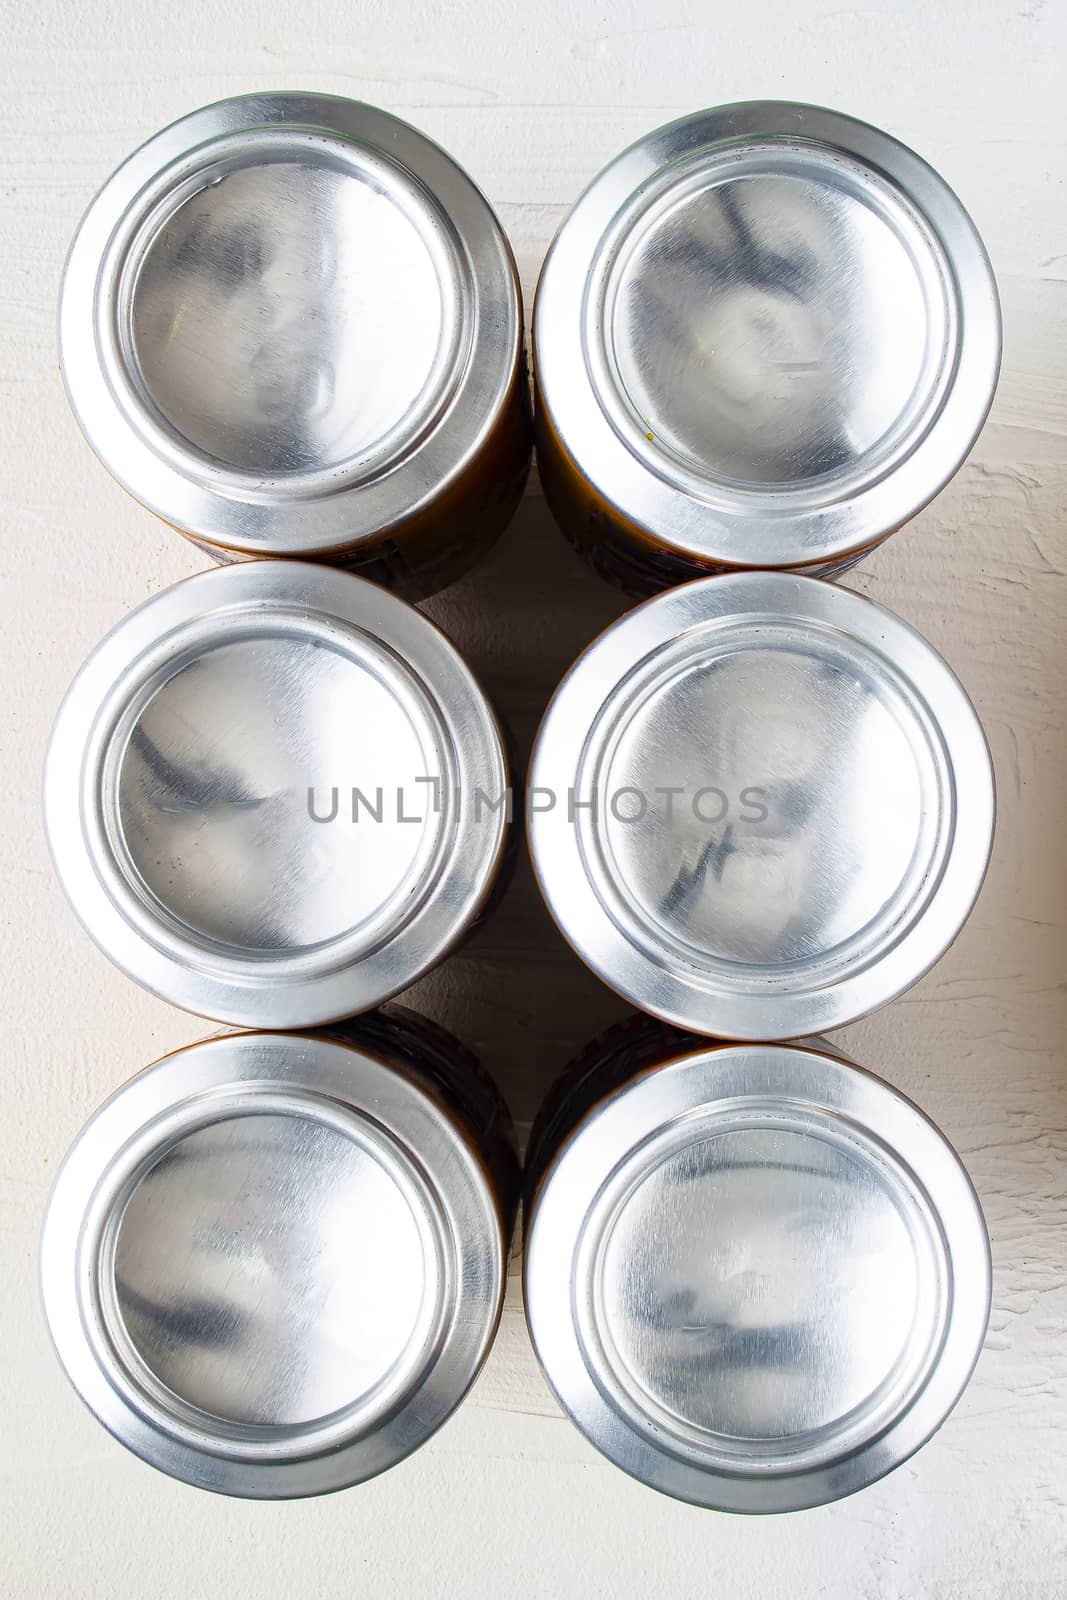 Bottom part of a can beer six pack